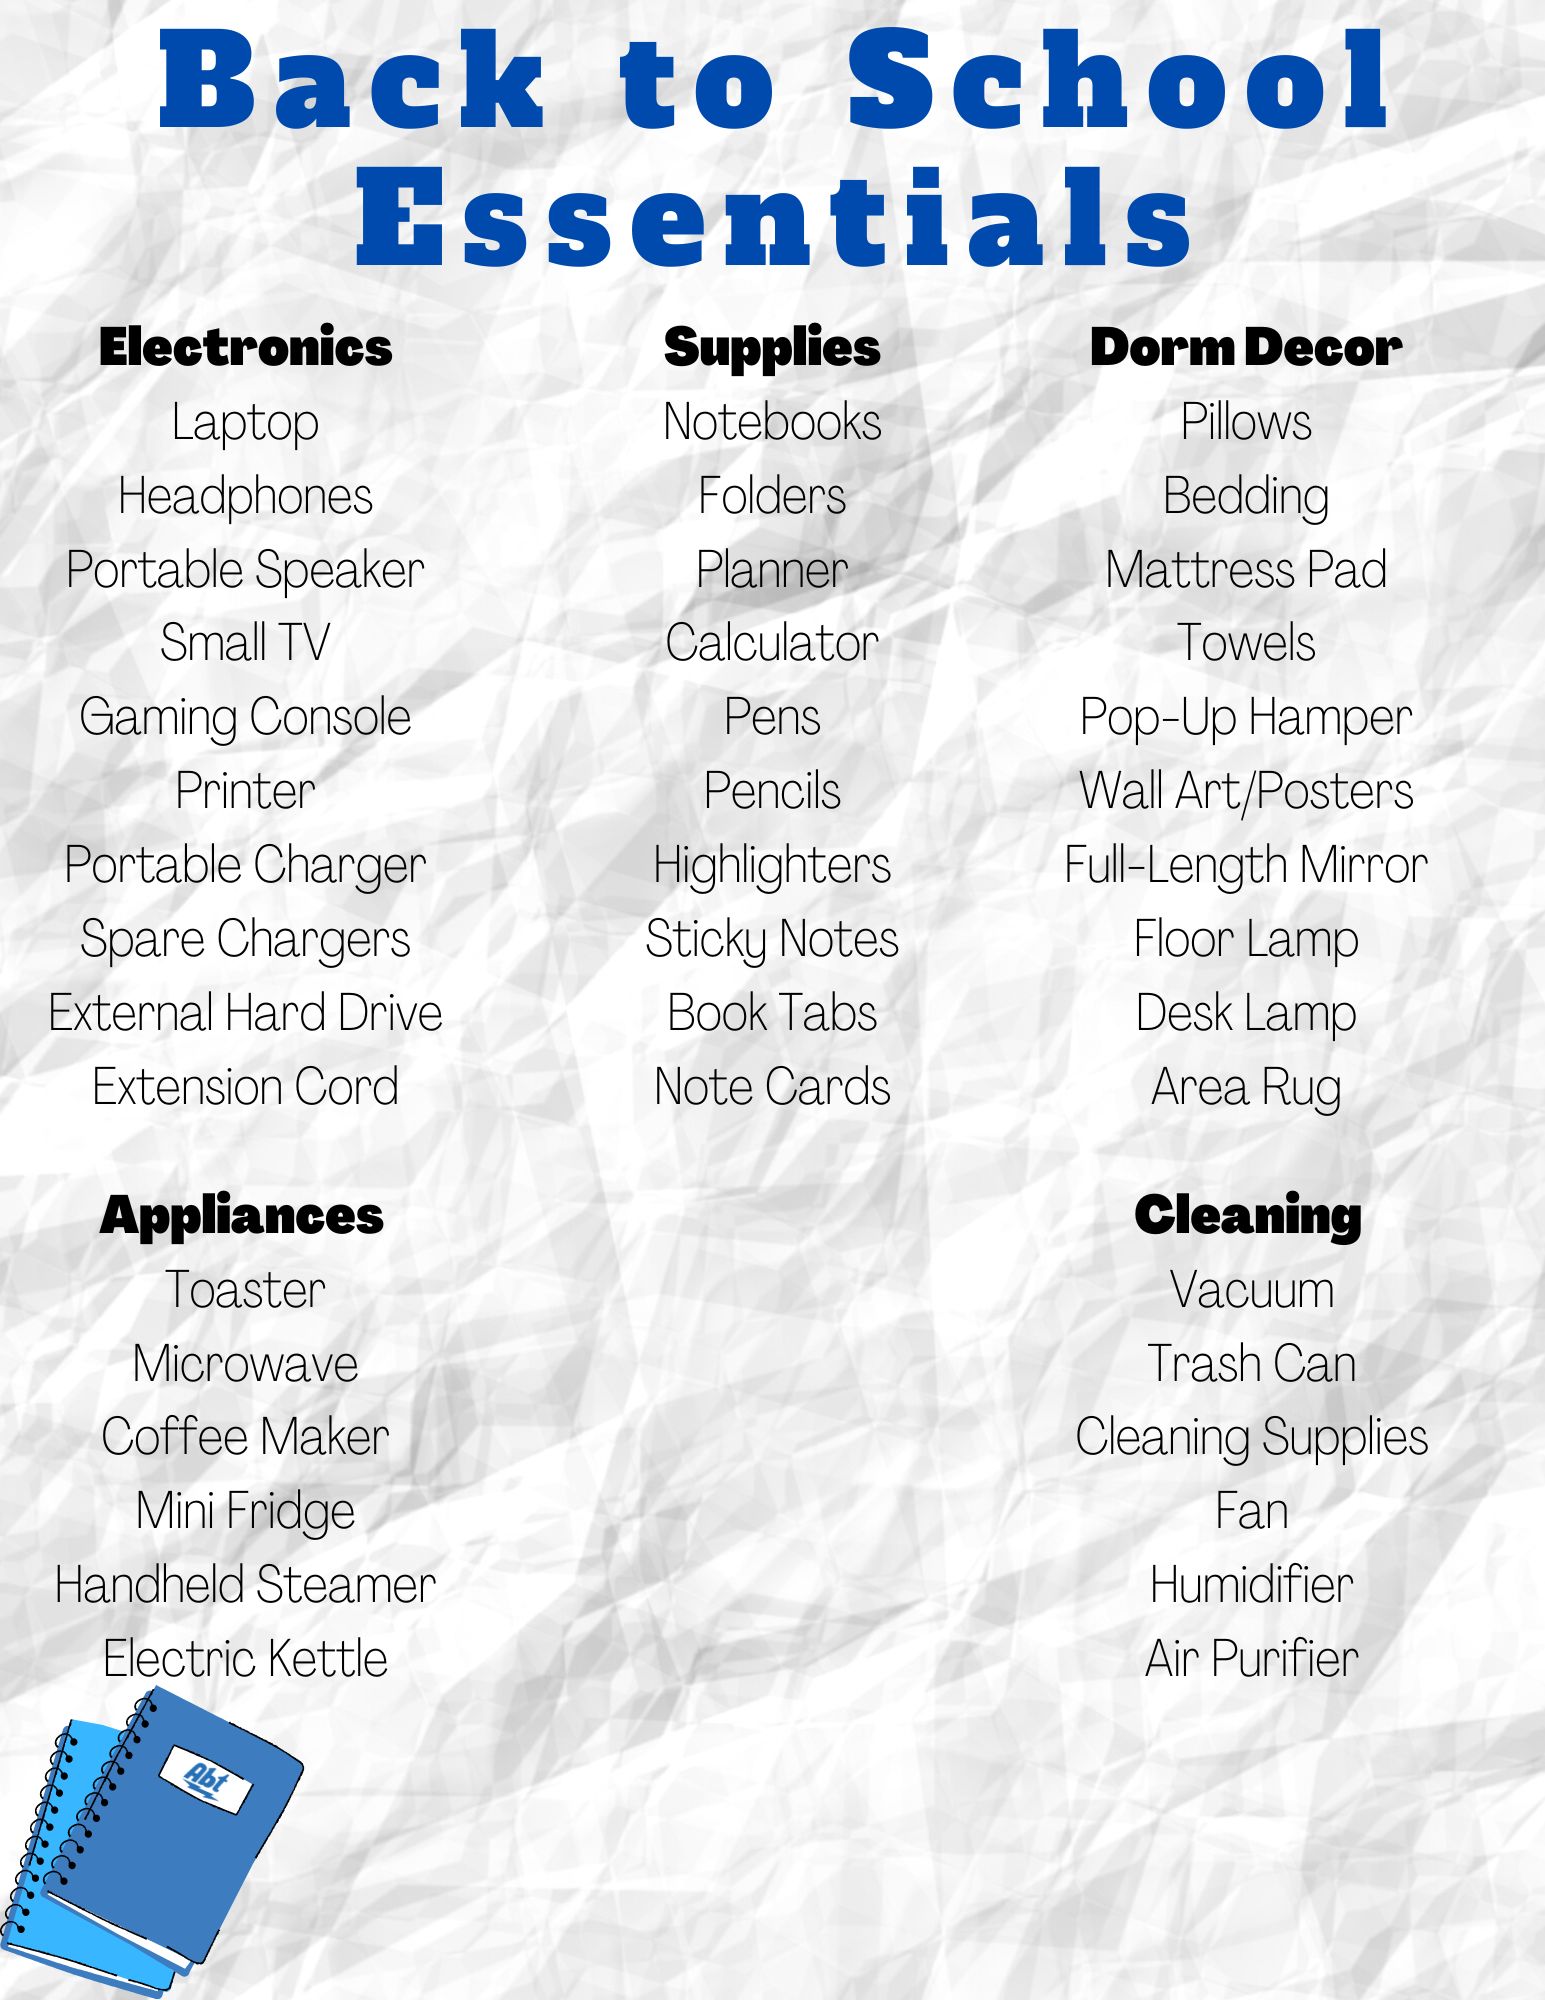 checklist of college essentials including school supplies, electronics and appliances